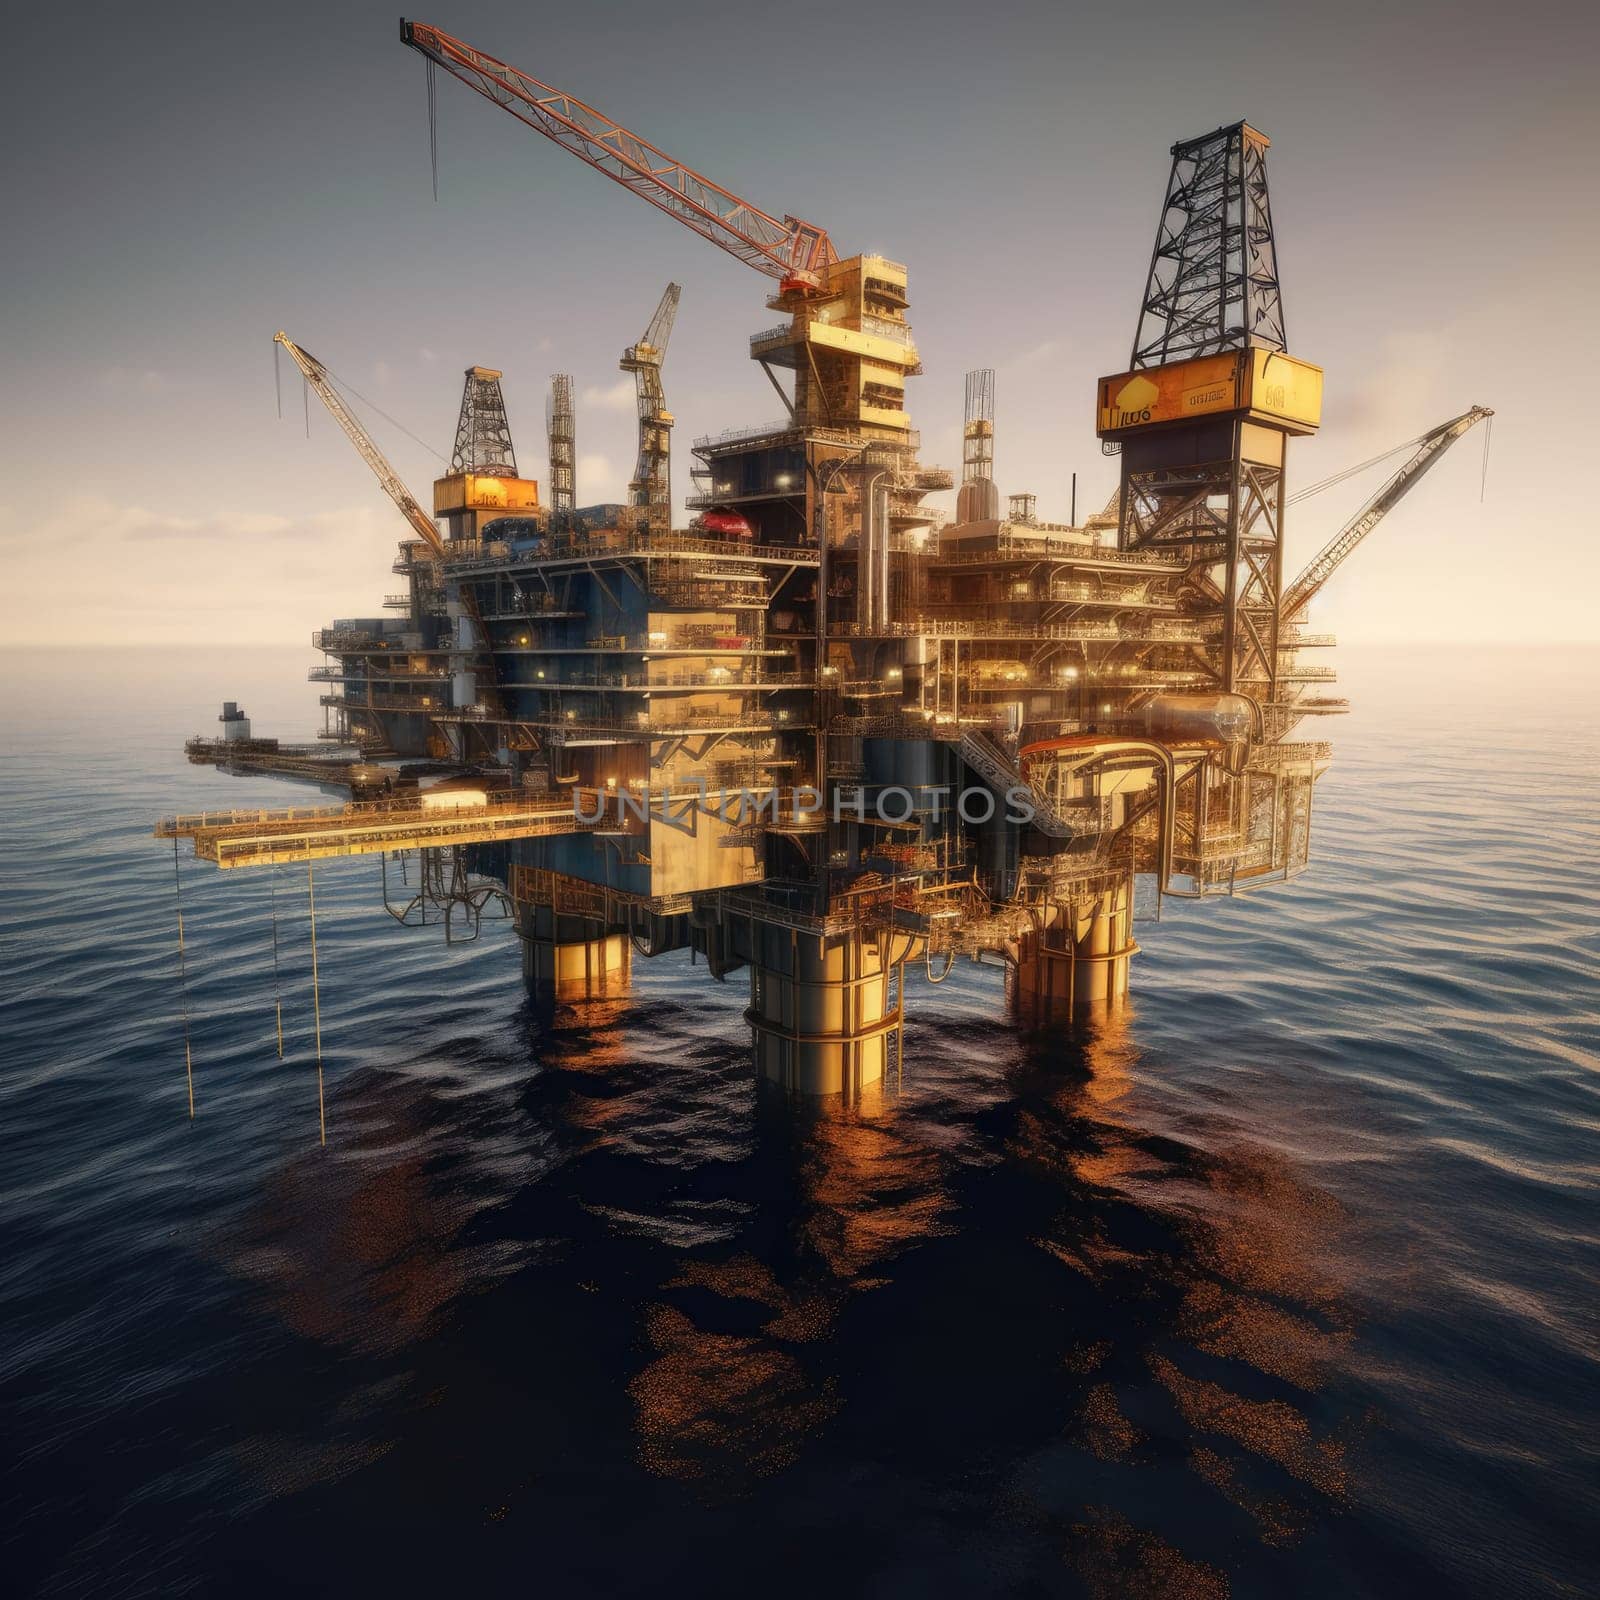 Offshore drilling rig. Oil and Gas Production Concept